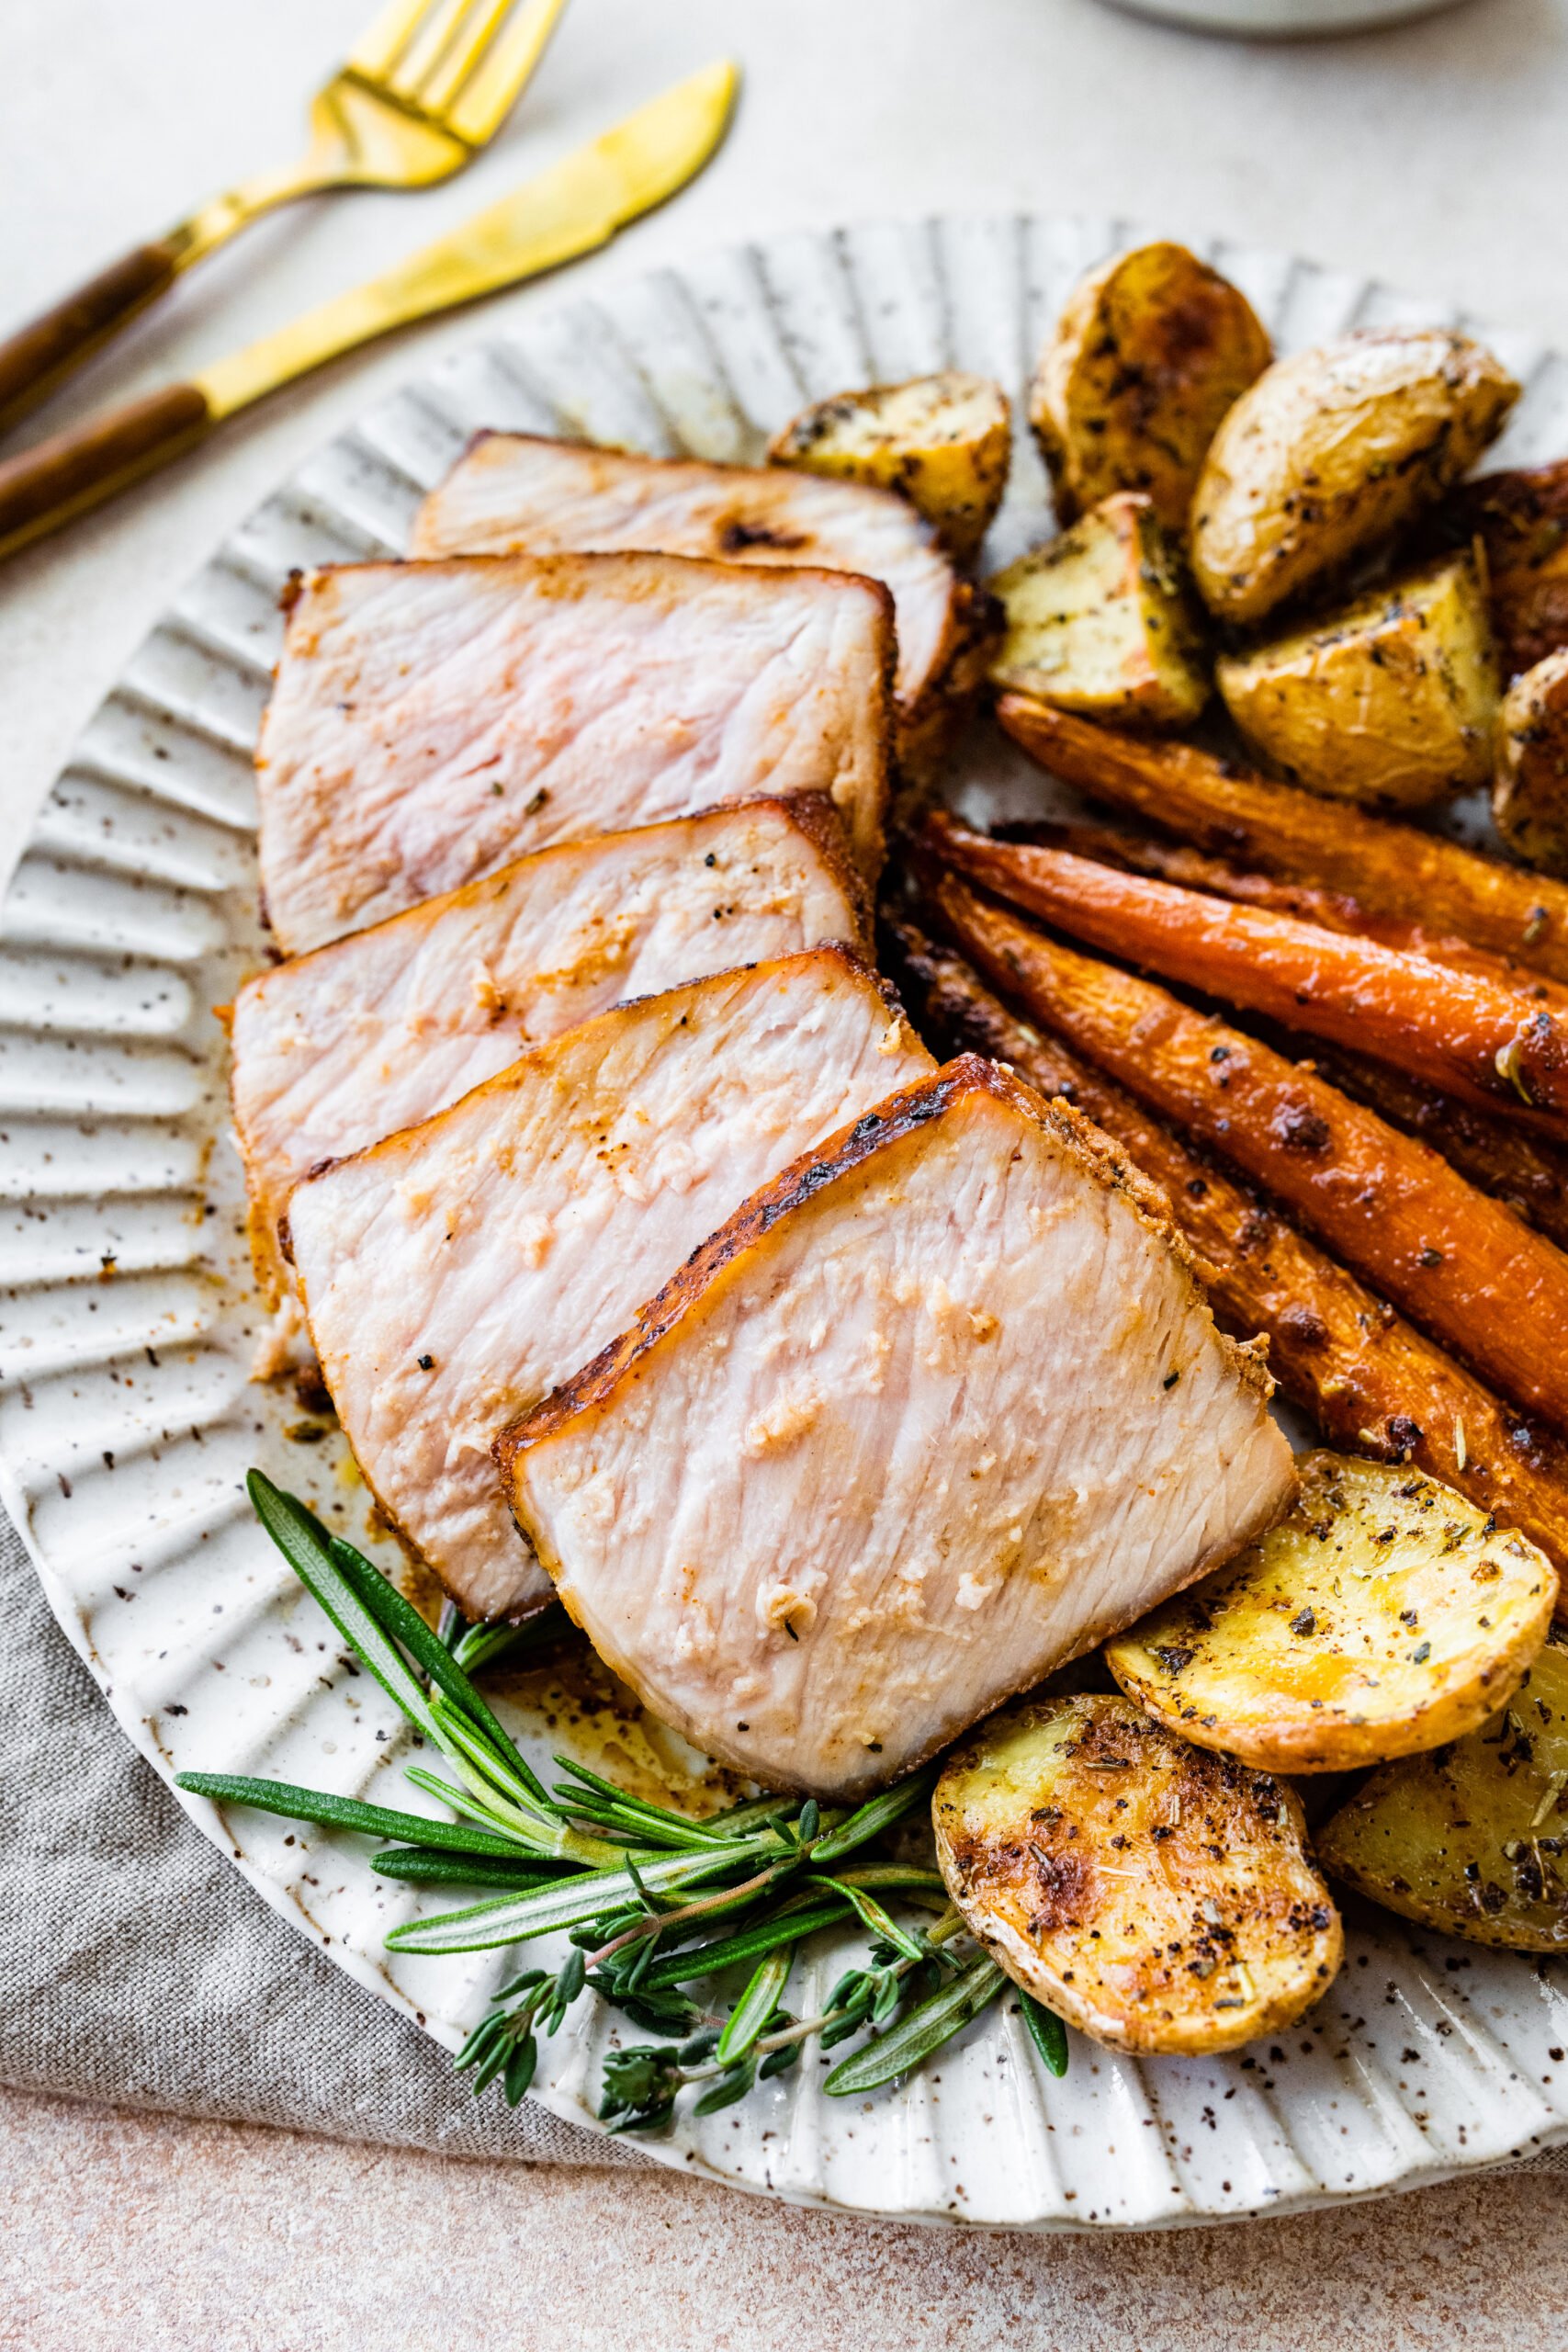 Lots of thick pork chop slices on a plate with potatoes and carrots.